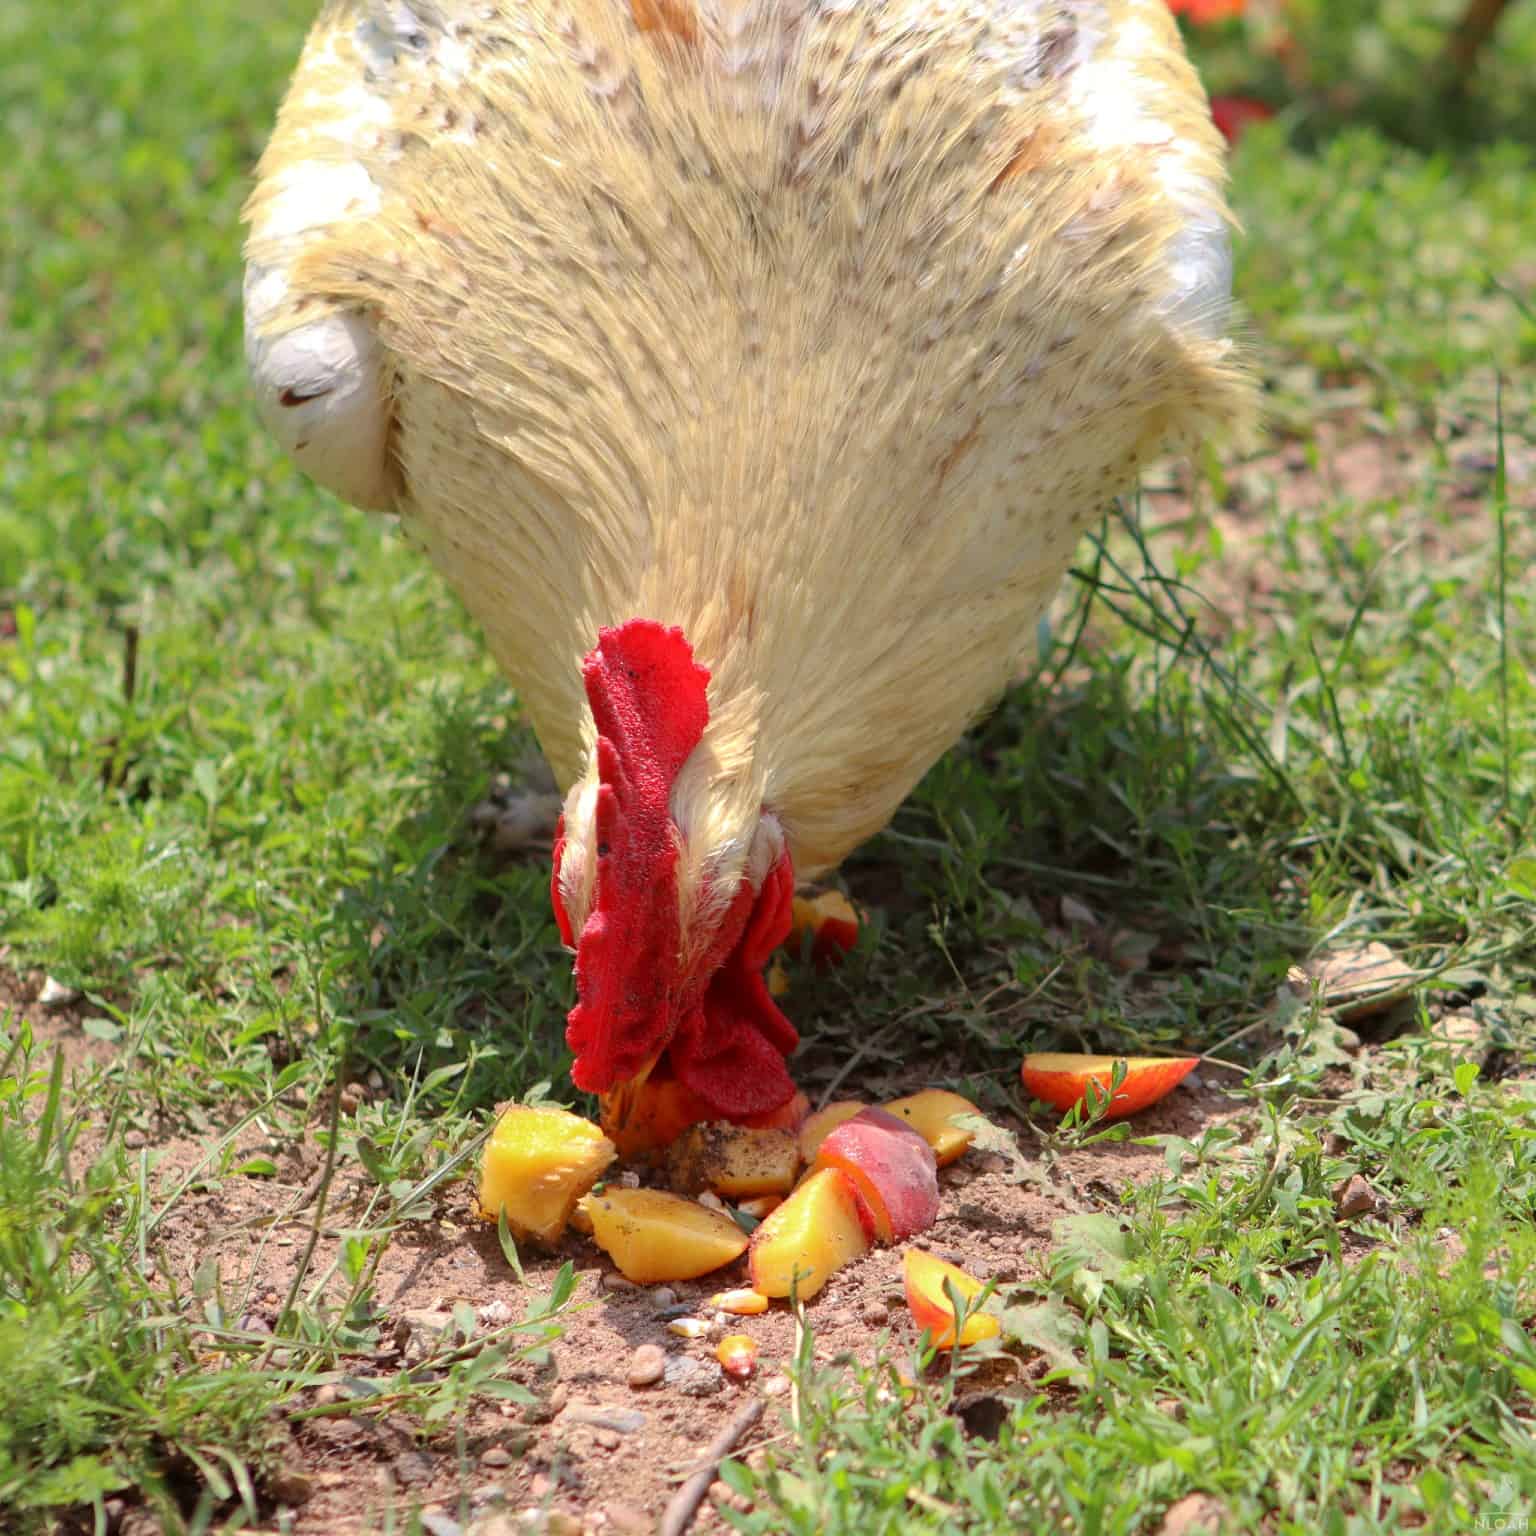 rooster eating a sliced peach